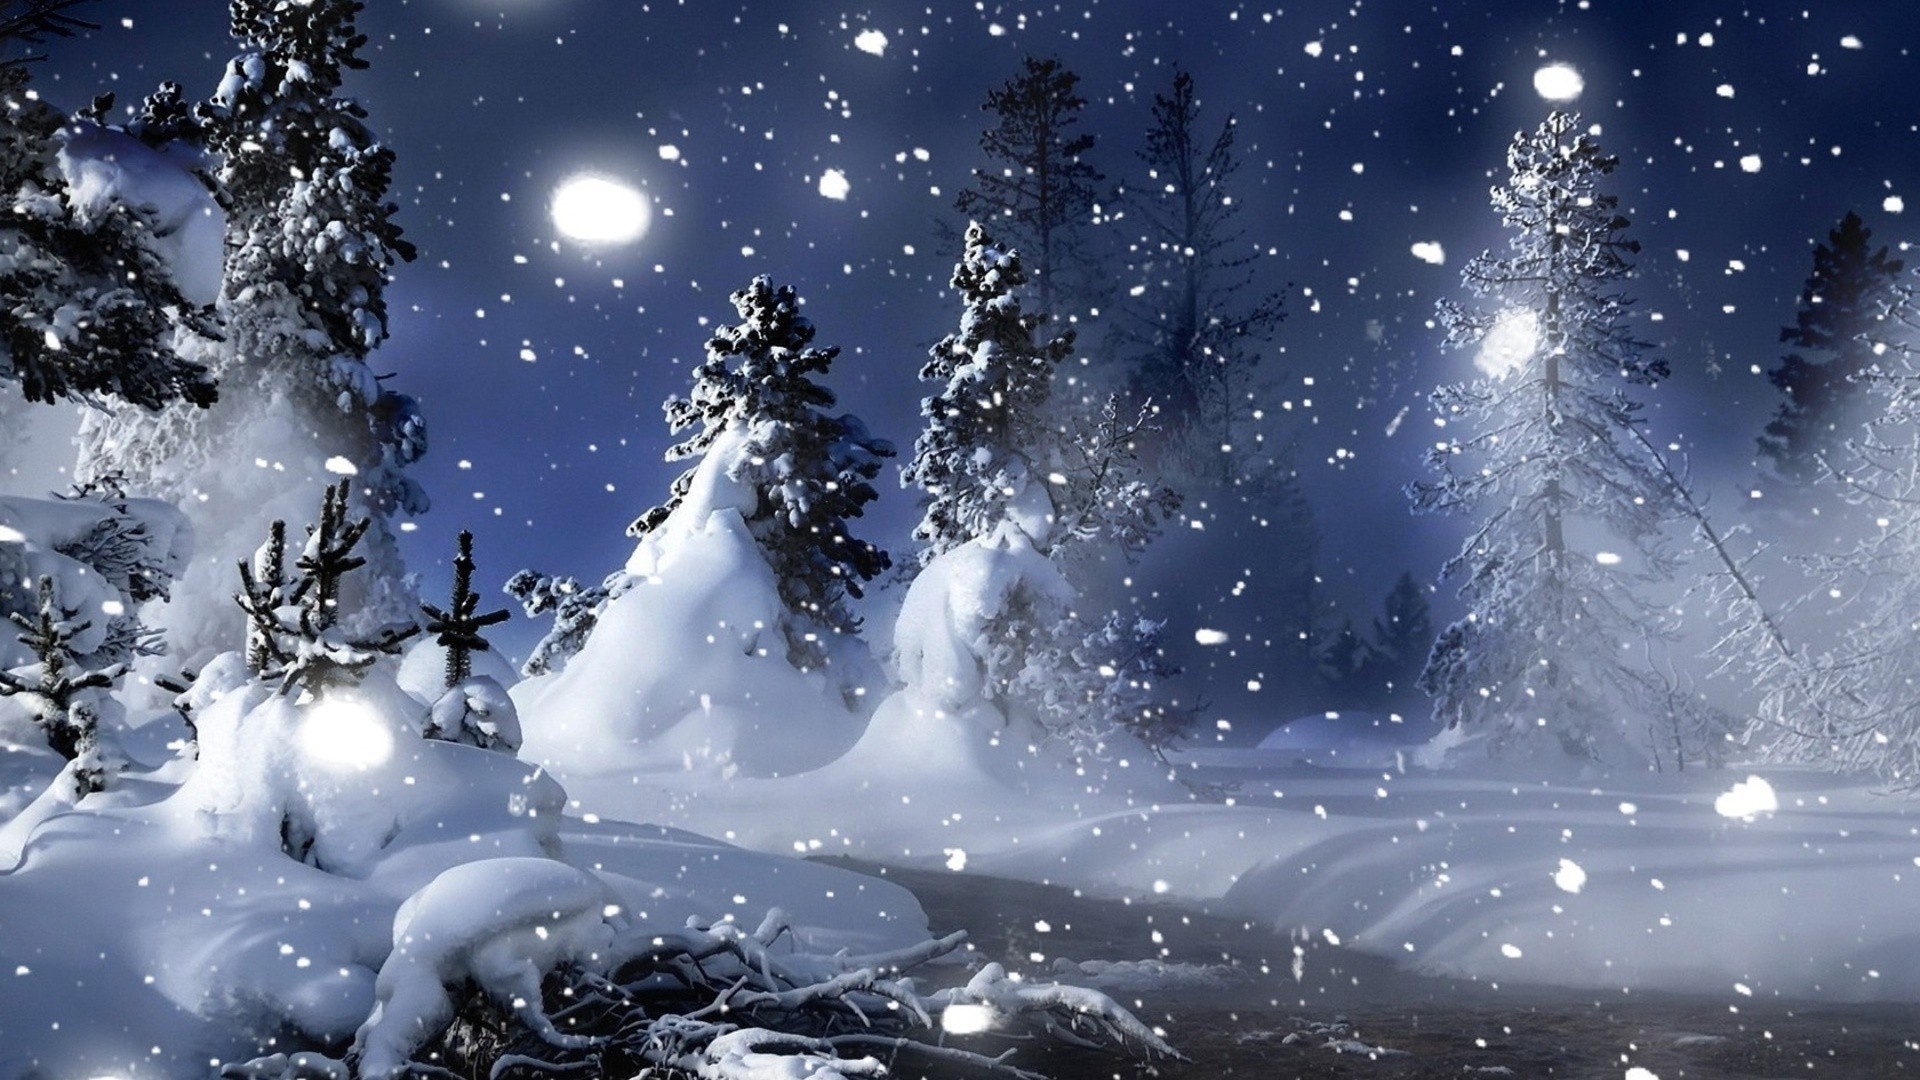 1920x1080 Nature landscapes christmas trees forest snowing snowflakes winter snow  seasons mountains white wallpaper |  | 26155 | WallpaperUP